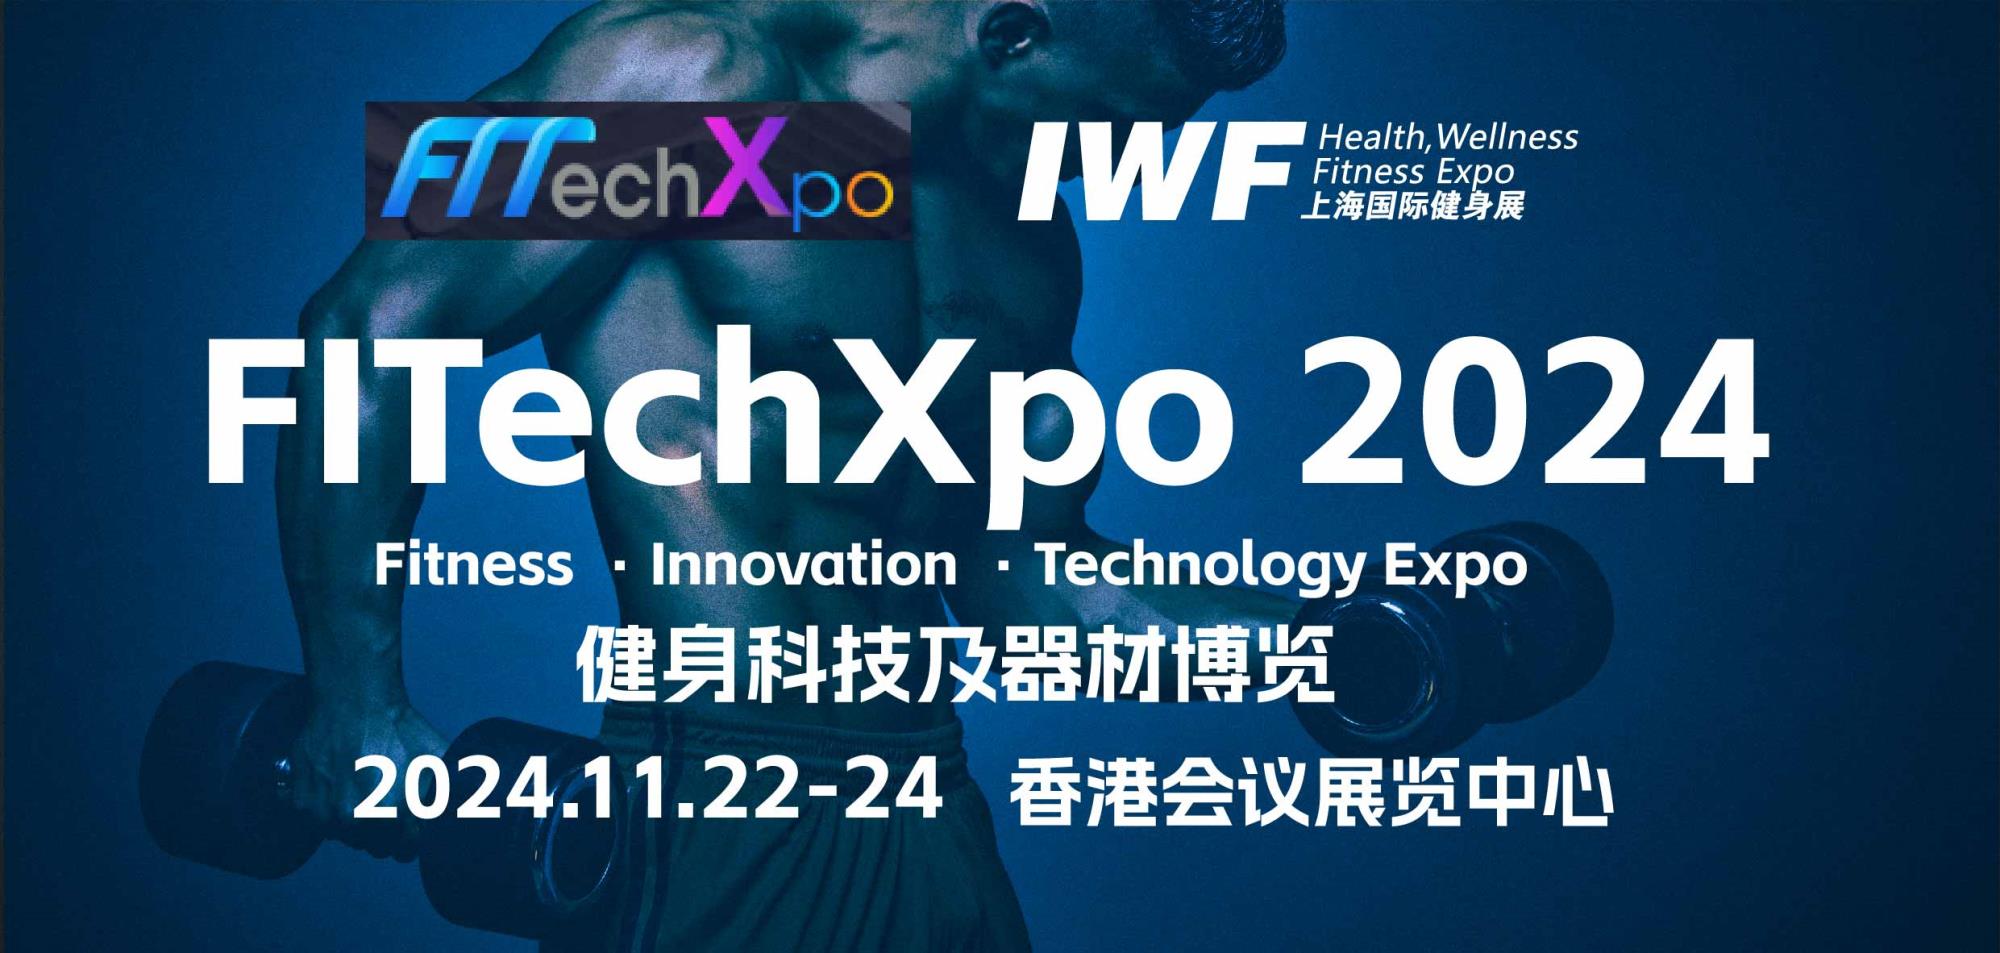 IWF and FITechXpo: Build a New Future in Fitness Tech